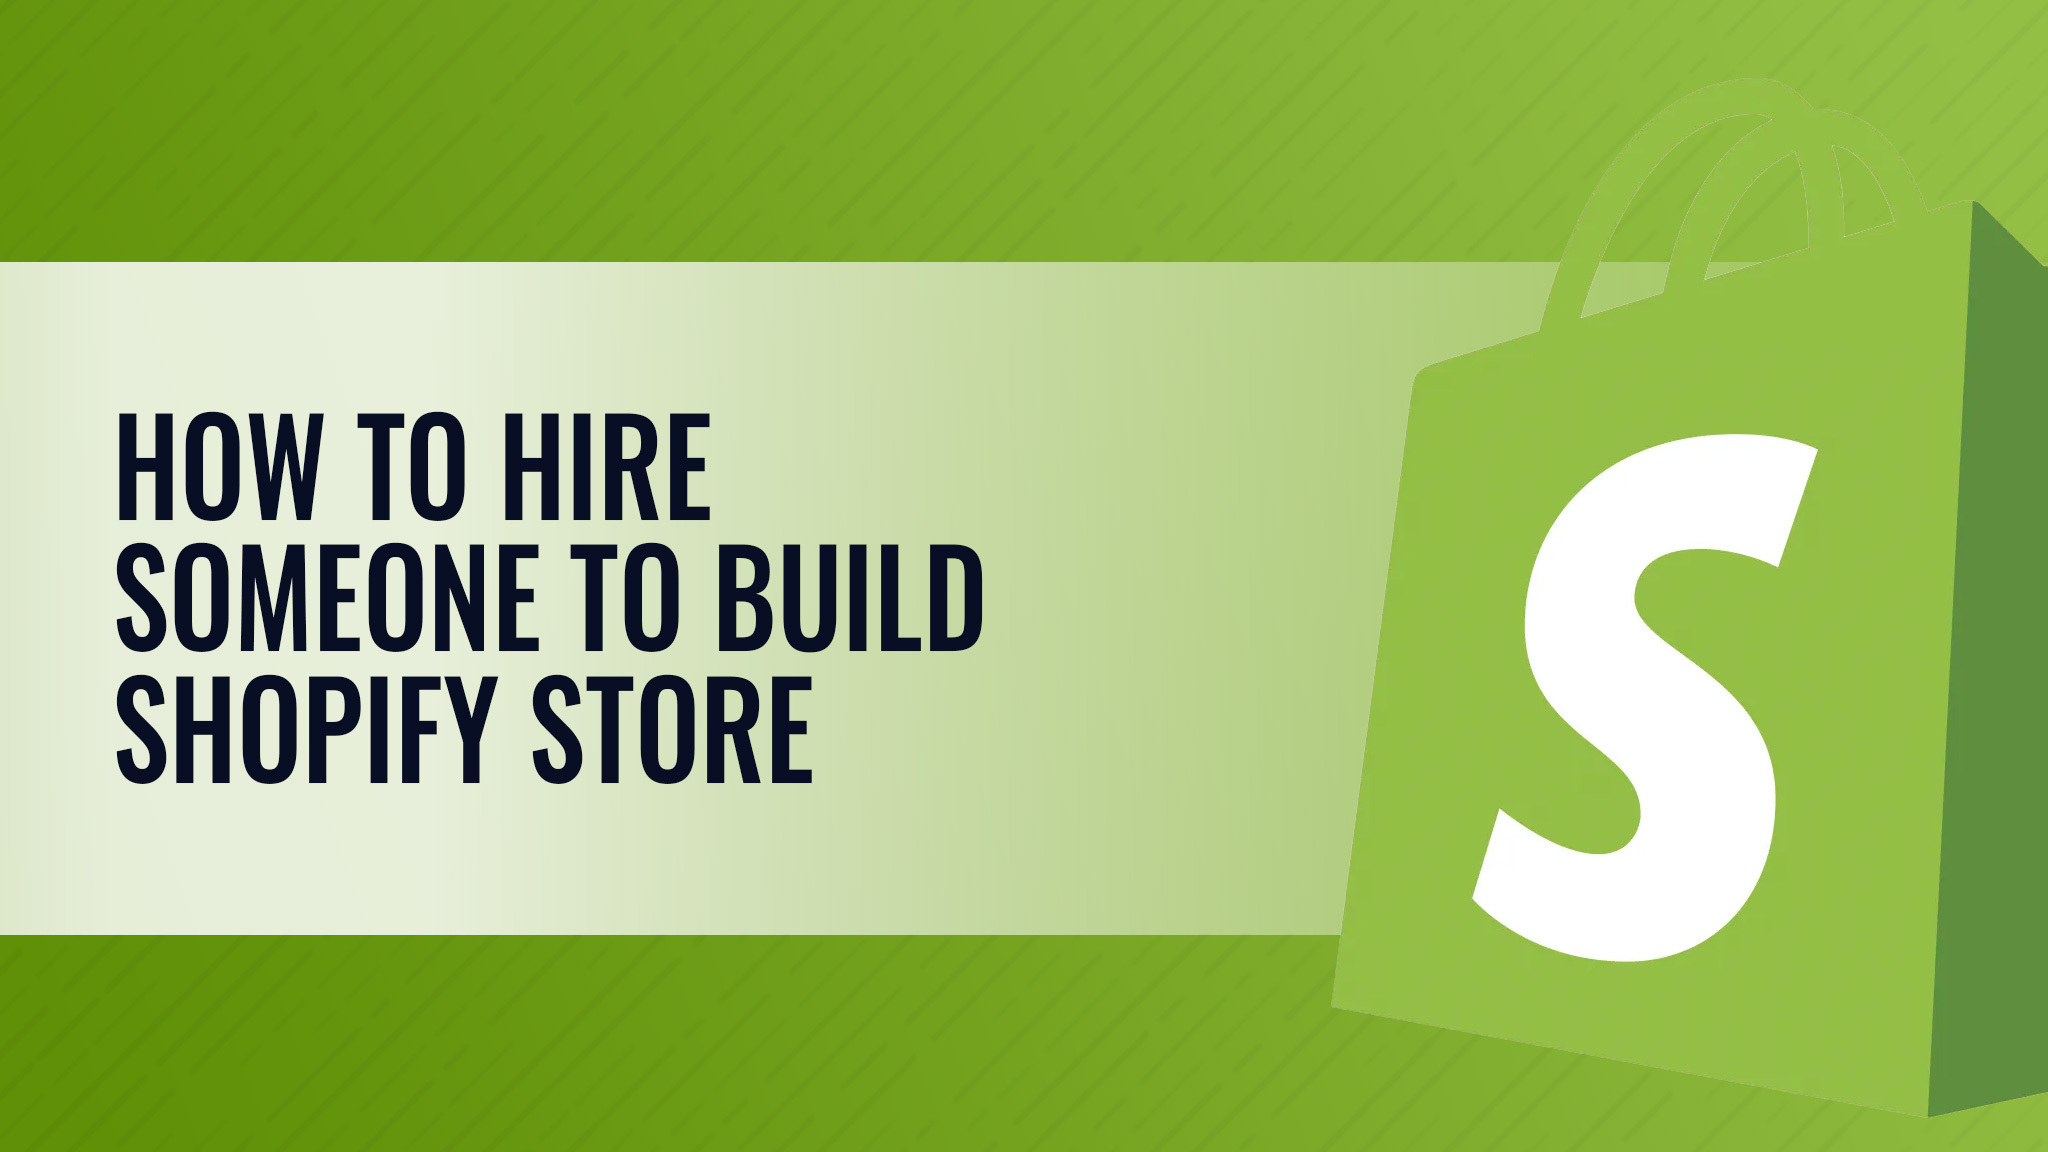 Hire Someone to Build Shopify Store